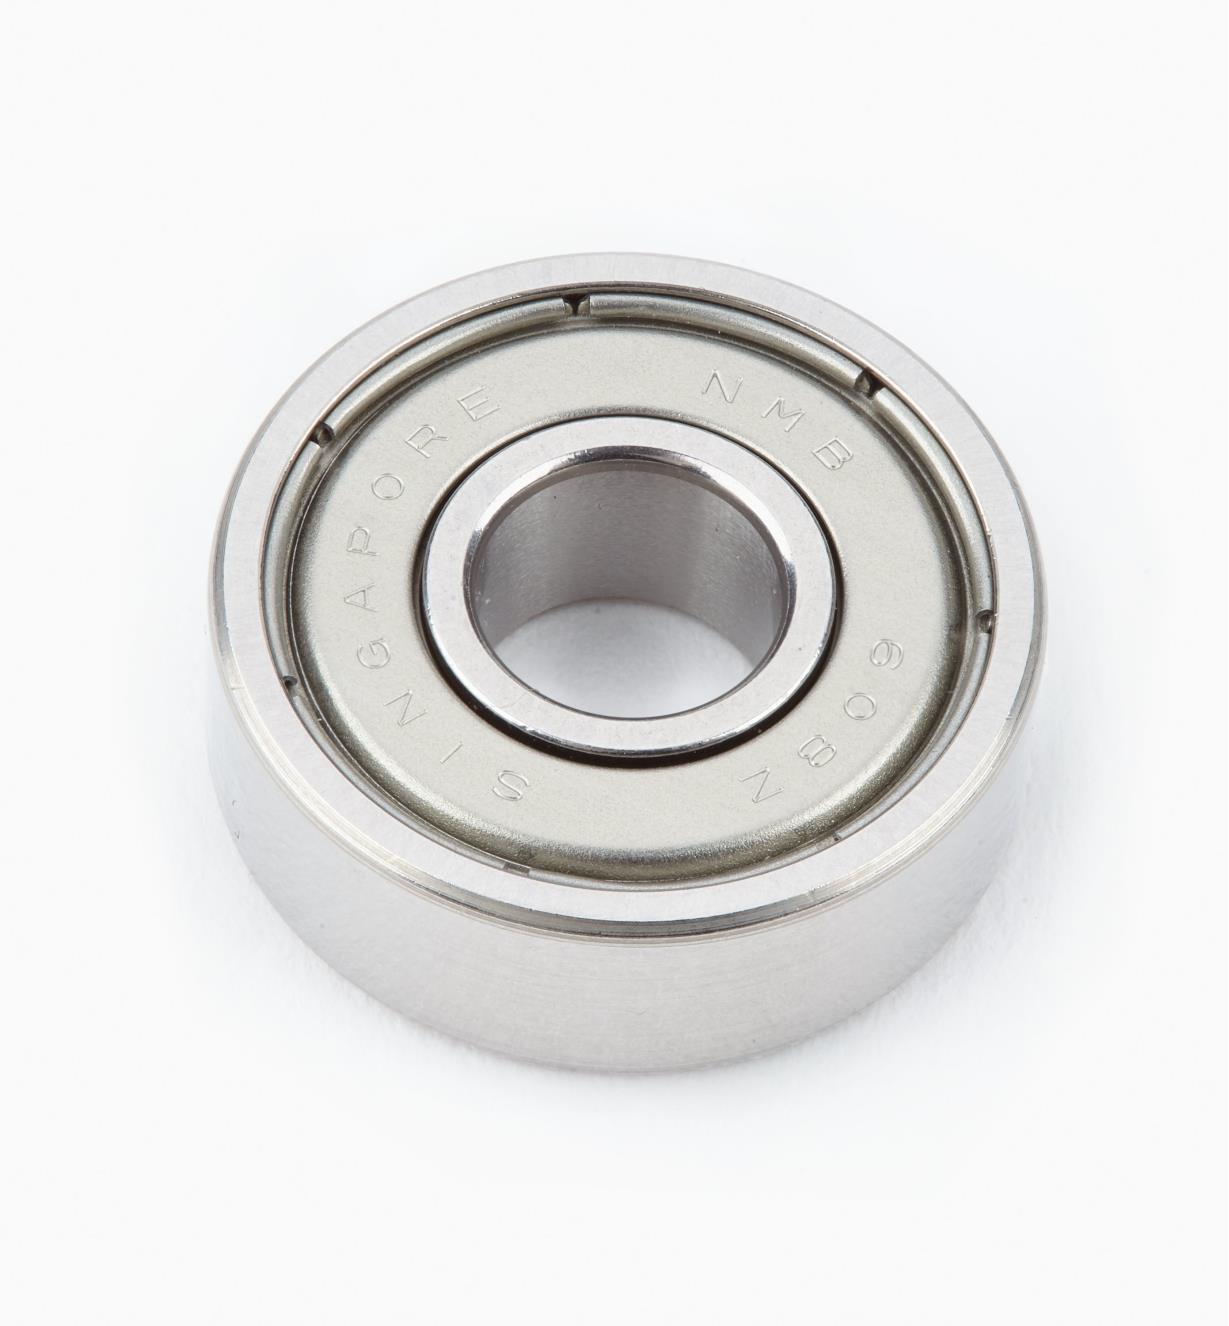 16J9511 - 22mm x 8mm  Replacement Bearing